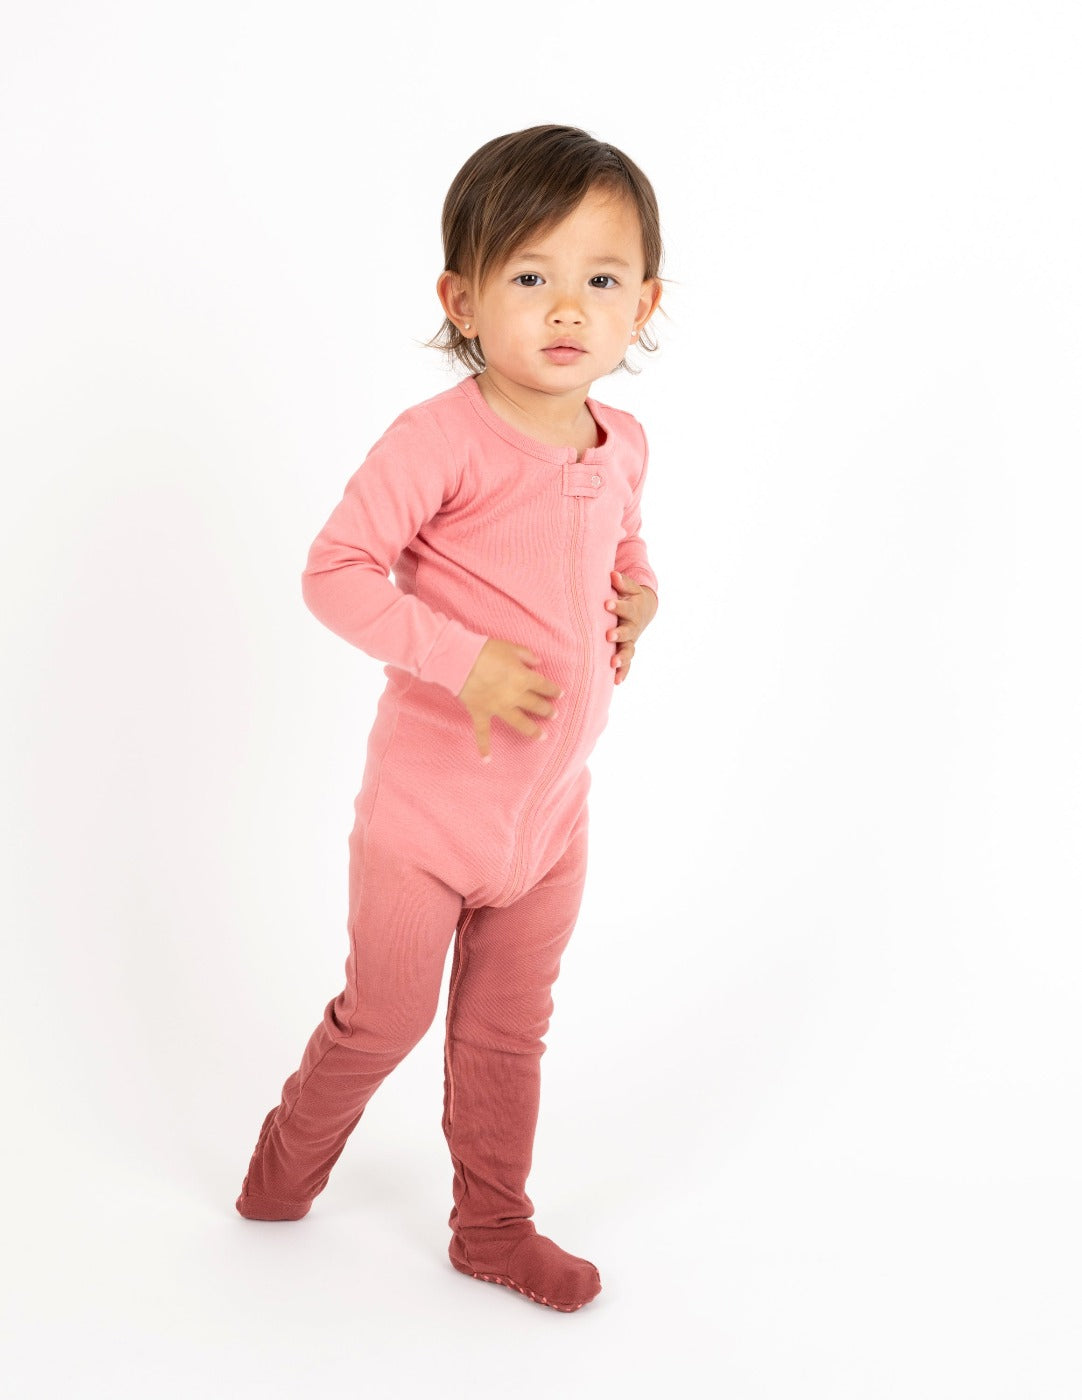 Baby Footed Ombré Dye Cotton Pajamas